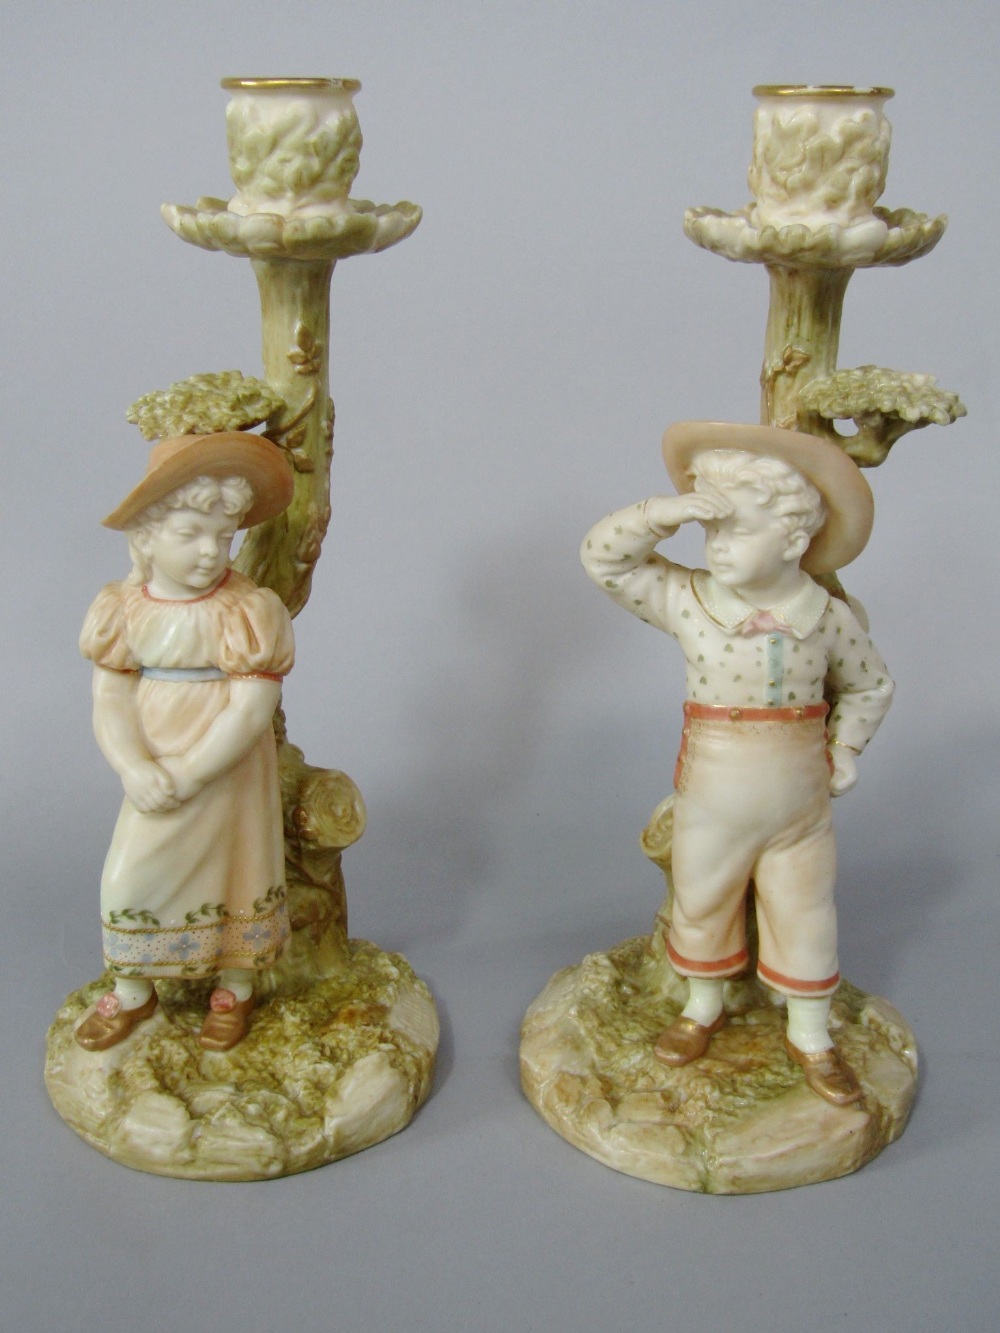 A pair of Victorian Royal Worcester candlesticks by James Hadley, both in the form of tree trunks